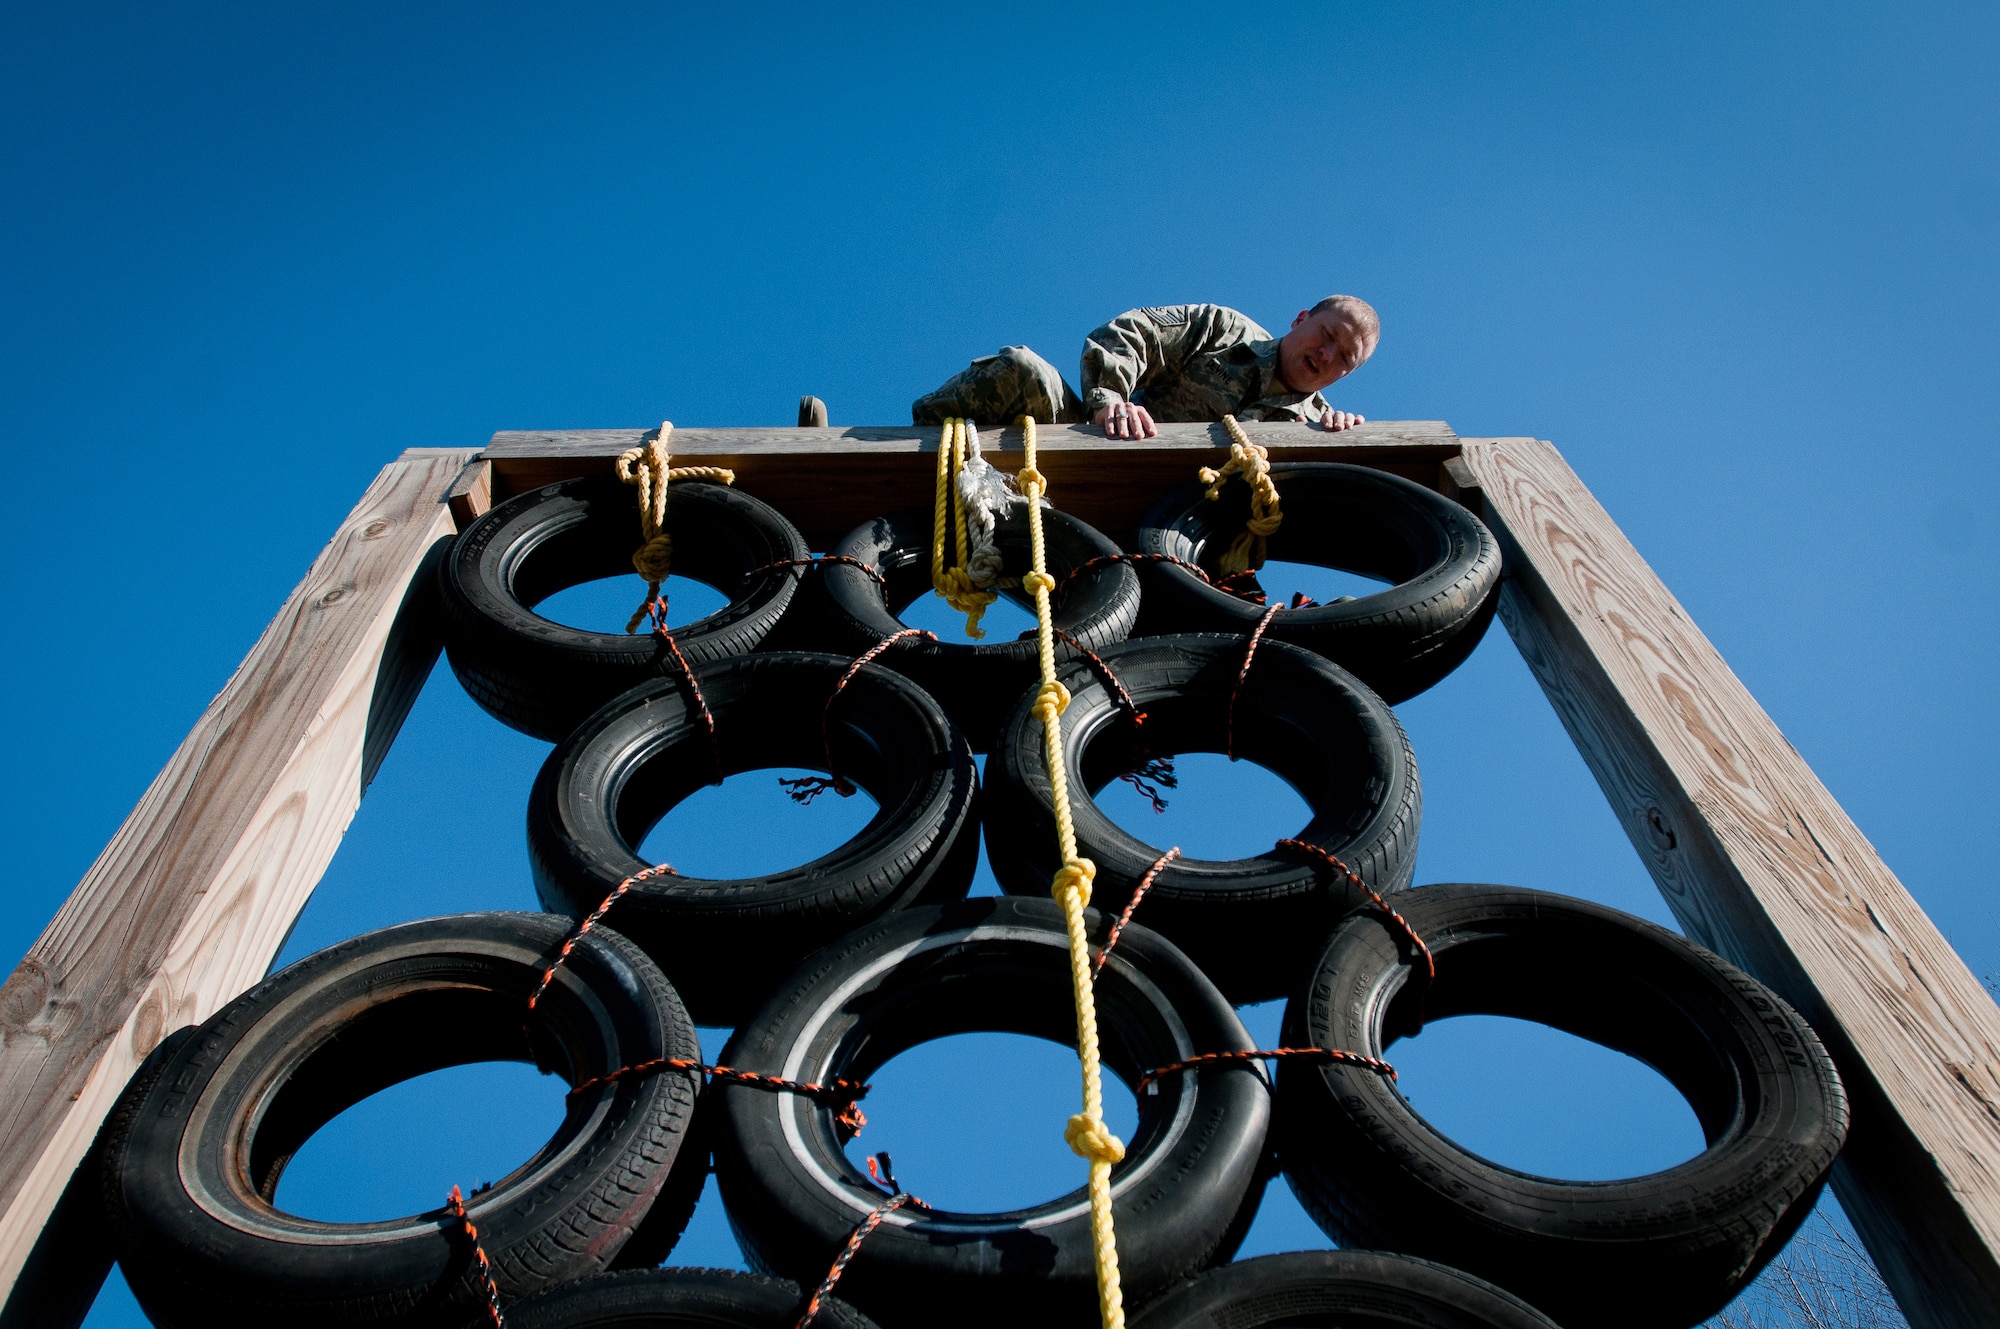 Master Sgt. Josh Devine, a member of the Kentucky Air National Guard's 123rd Security Forces Squadron, climbs over a tire tower at Southern High School in Louisville, Ky., Dec. 10, 2011. Airmen from the 123rd SFS were at the high school to use the Junior ROTC obstacle course for a team-building exercise as part of Wingman Day activities. (U.S. Air Force photo by Senior Airman Maxwell Rechel)